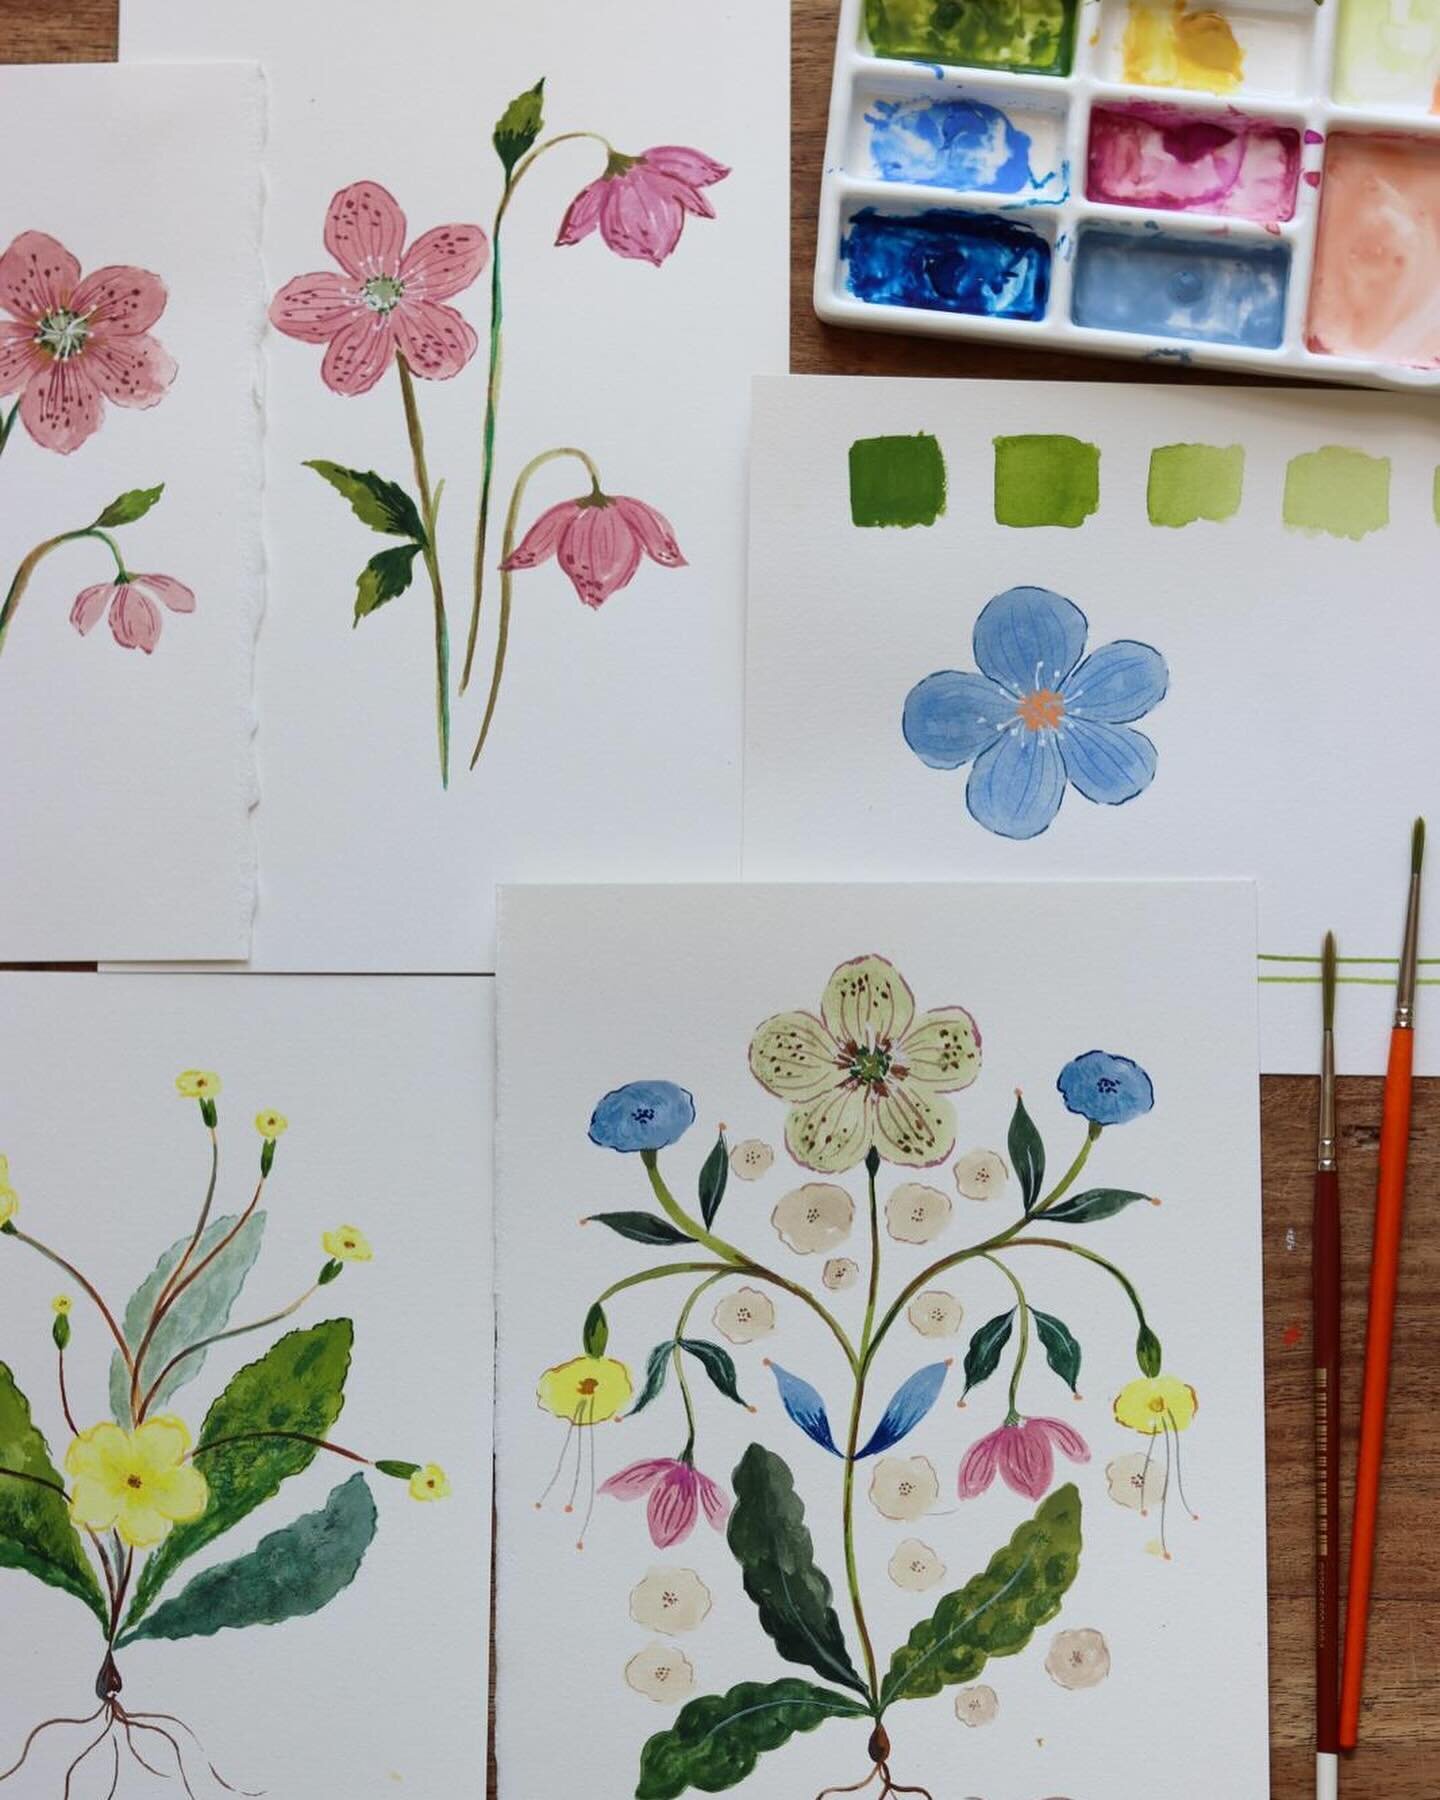 Thank you to everyone who joined us last night for &lsquo;gouache painting&rsquo; with @florawaycott.

We painted hellebores and primroses from the garden and Flora shared her beautifully considered and detailed process with us.  Thank you for being 